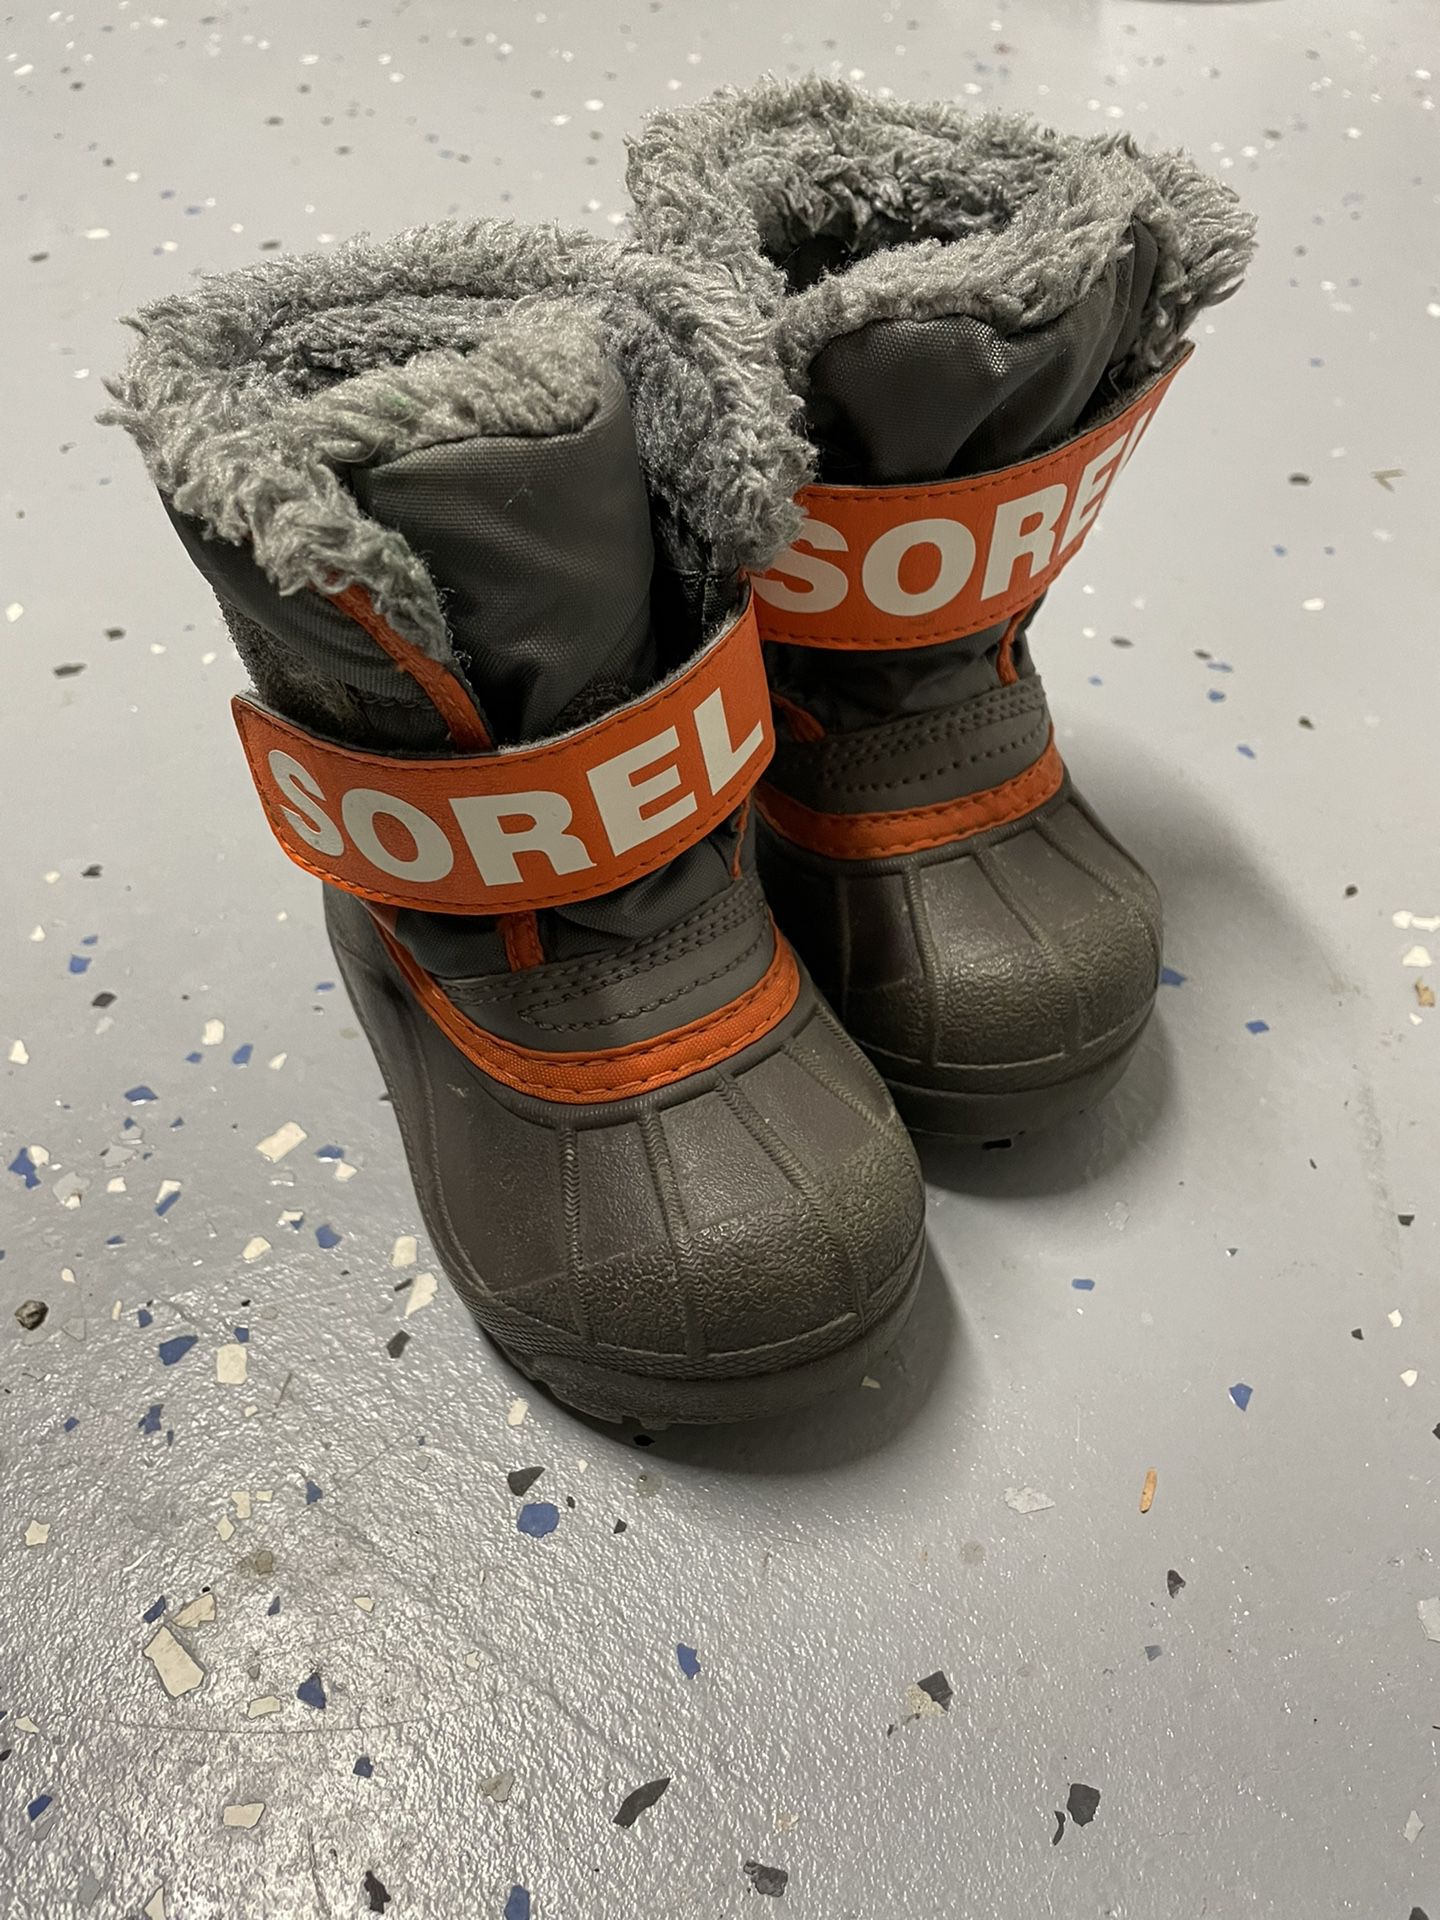 Toddler Size 5 Sorel Waterproof Snow Boots